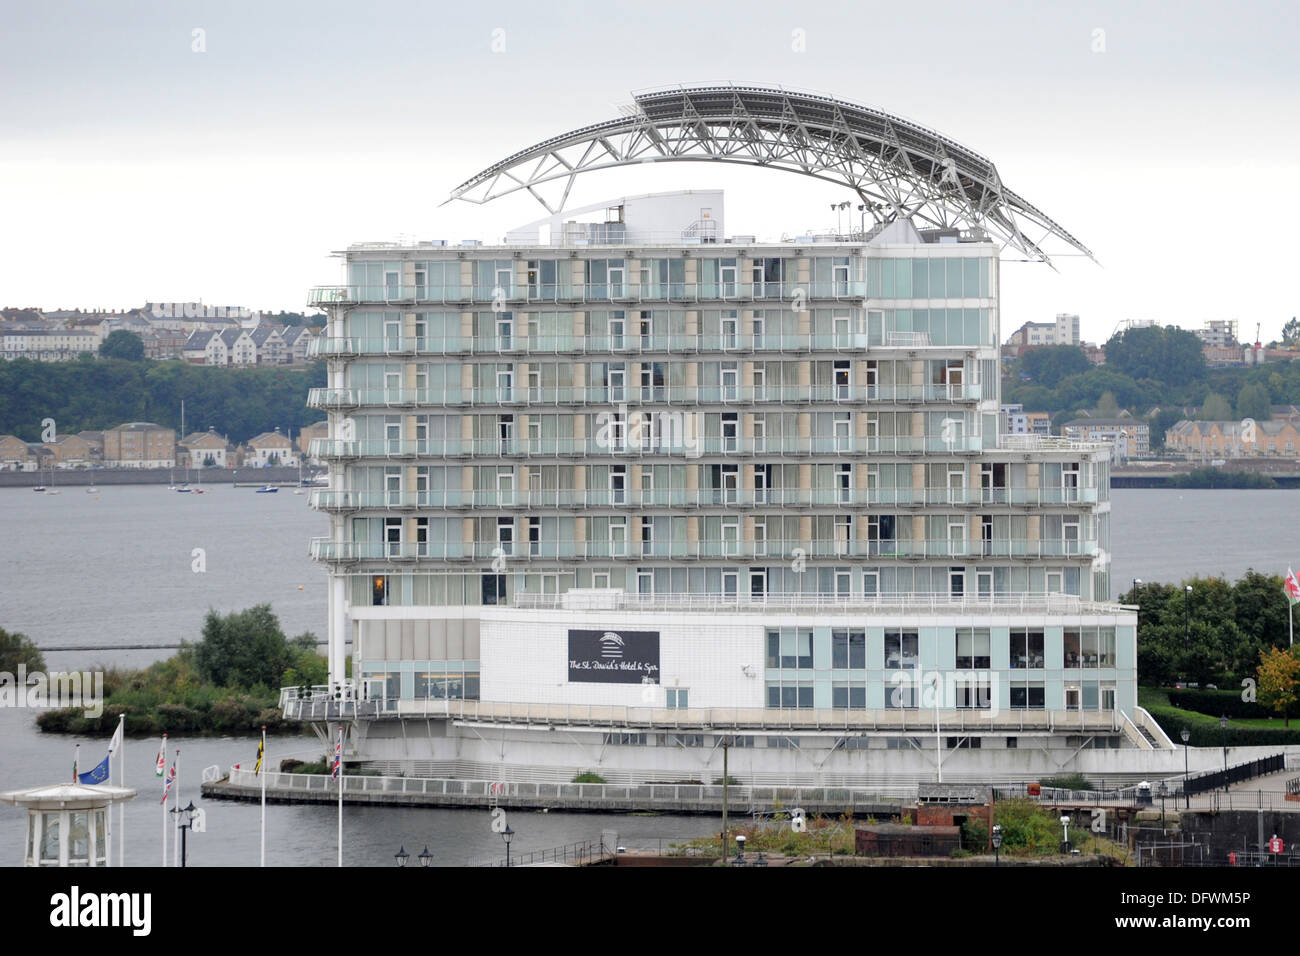 St. David's Hotel in Cardiff Bay, Wales. Stock Photo